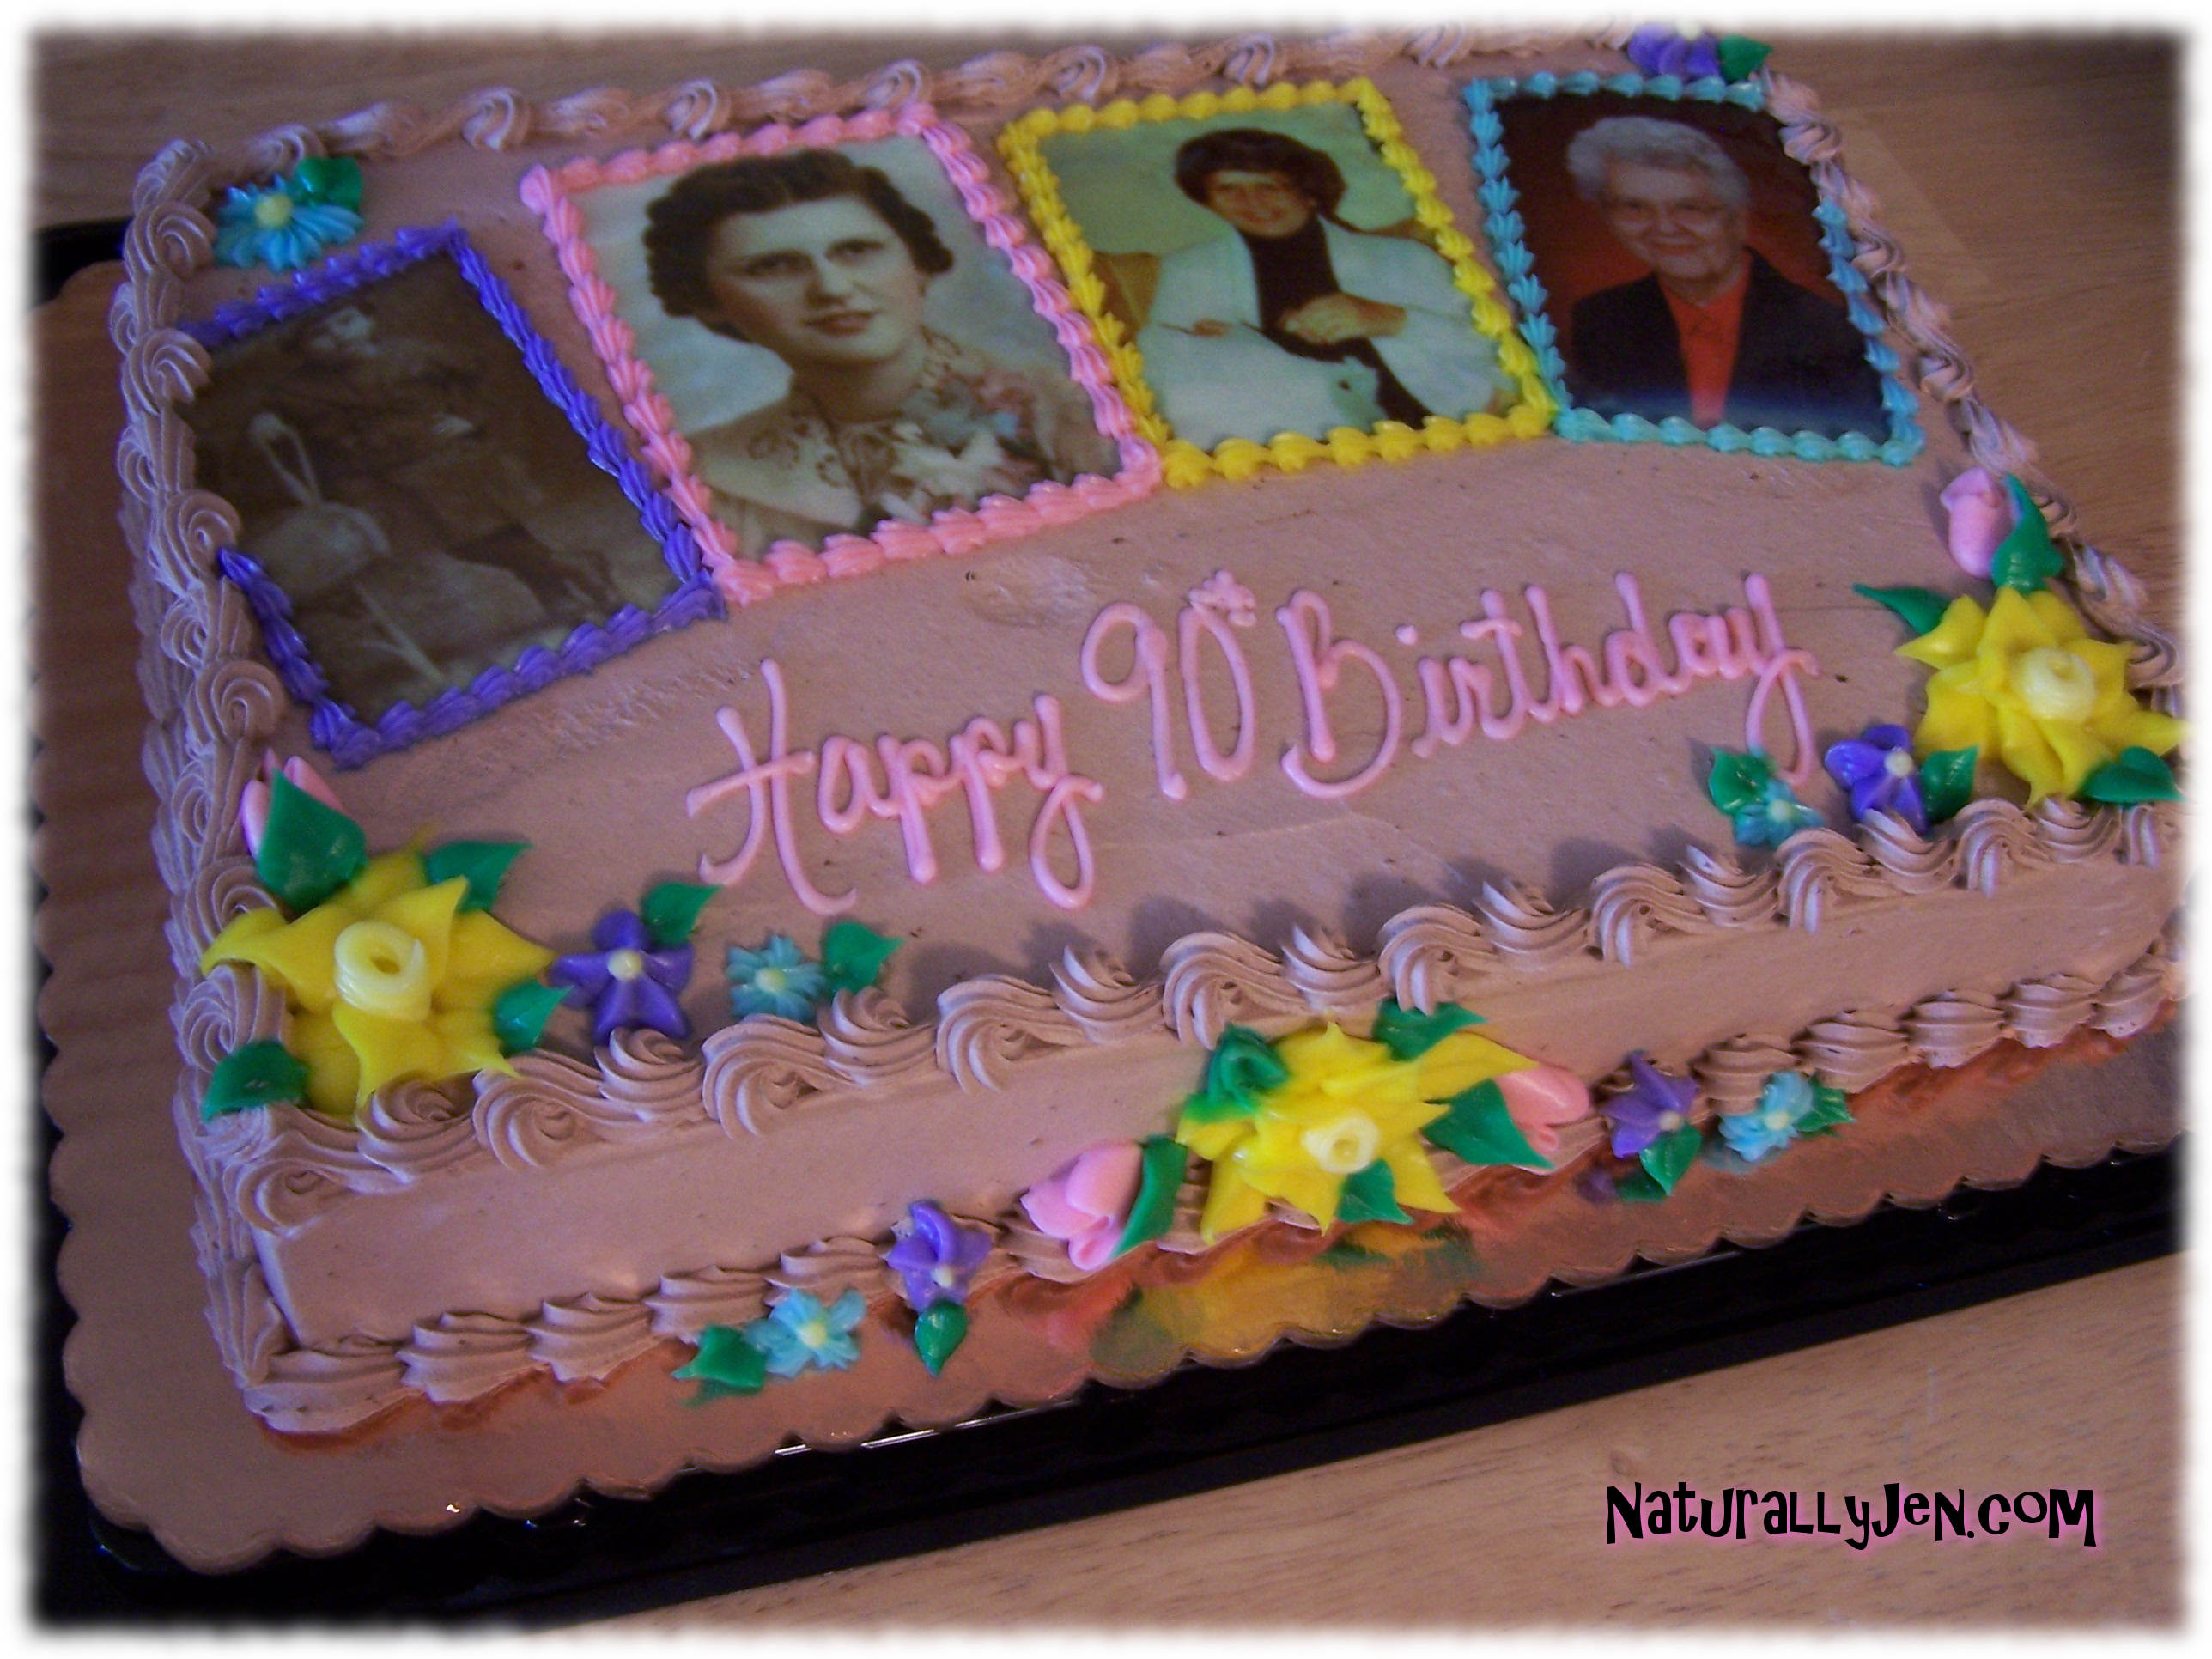 Edible Photographs Printed On Cakes by Naturally Jen